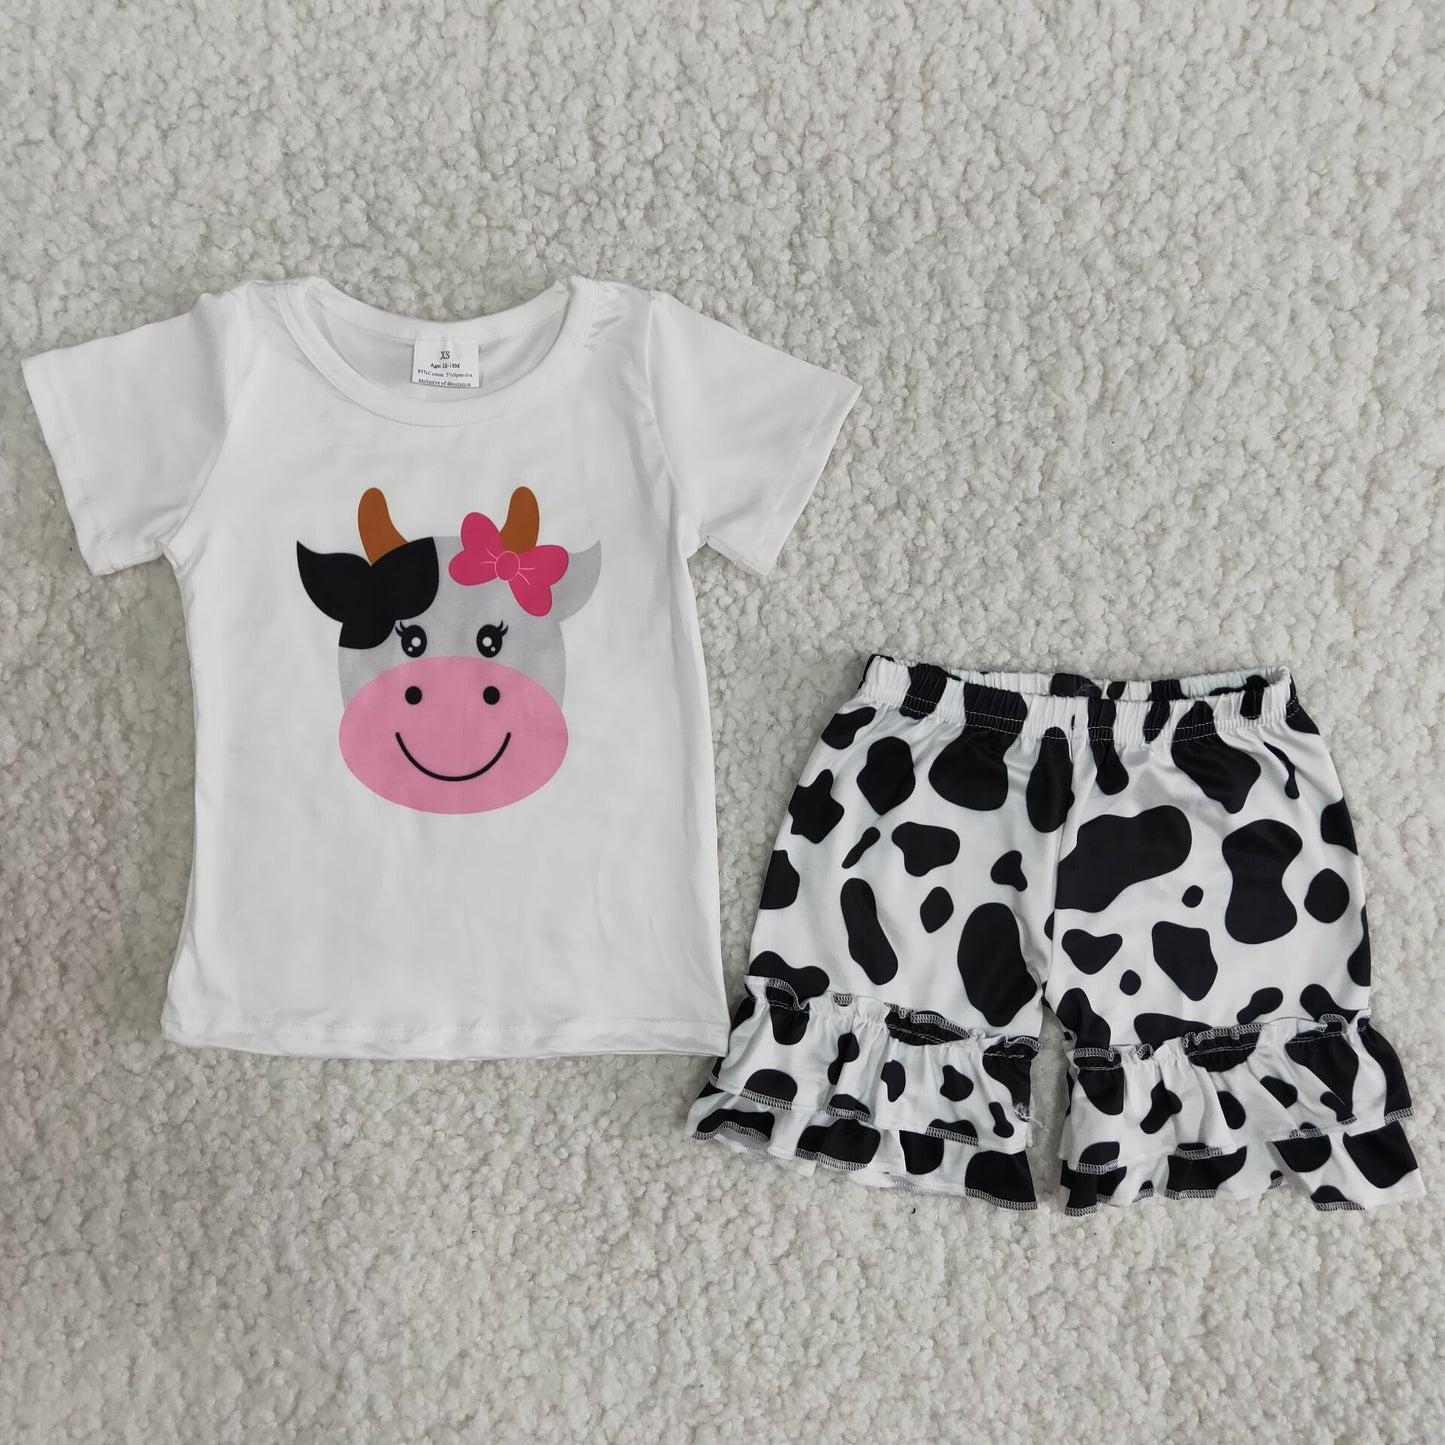 Girls cow outfit